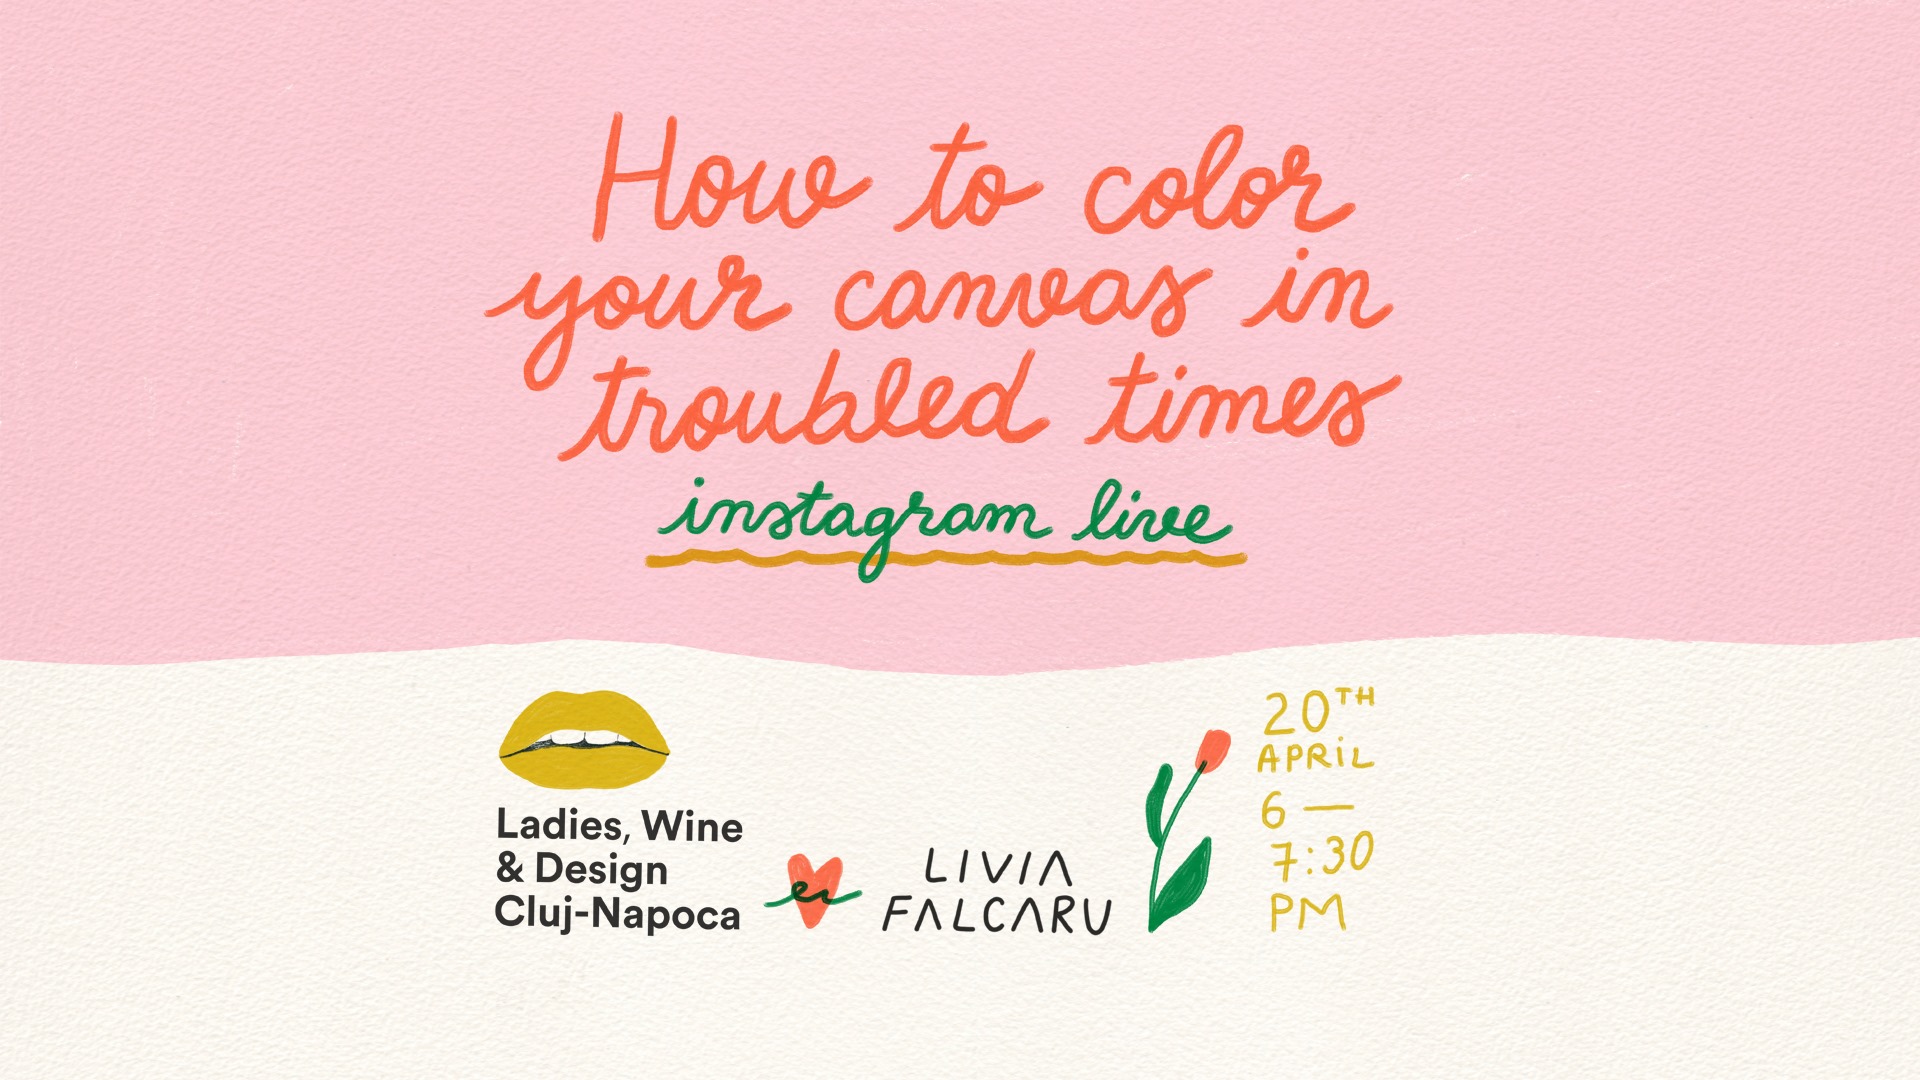 How to color your canvas in troubled times – Instagram Live cu Livia Falcaru